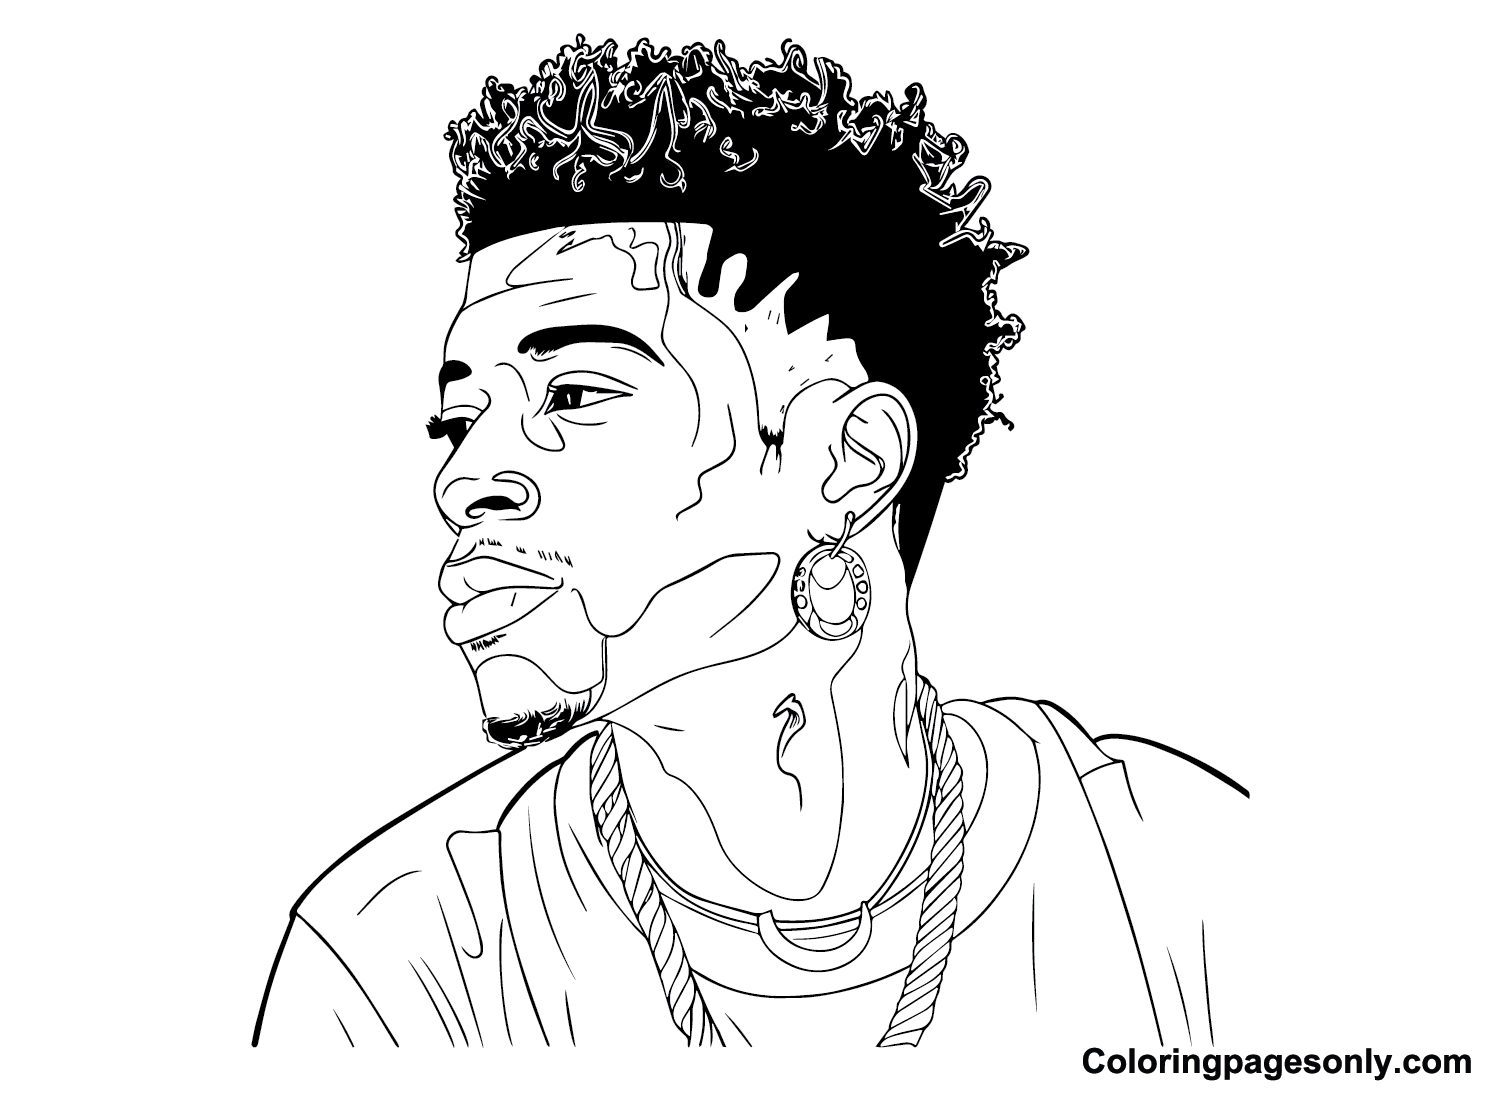 Blueface Free Coloring Page